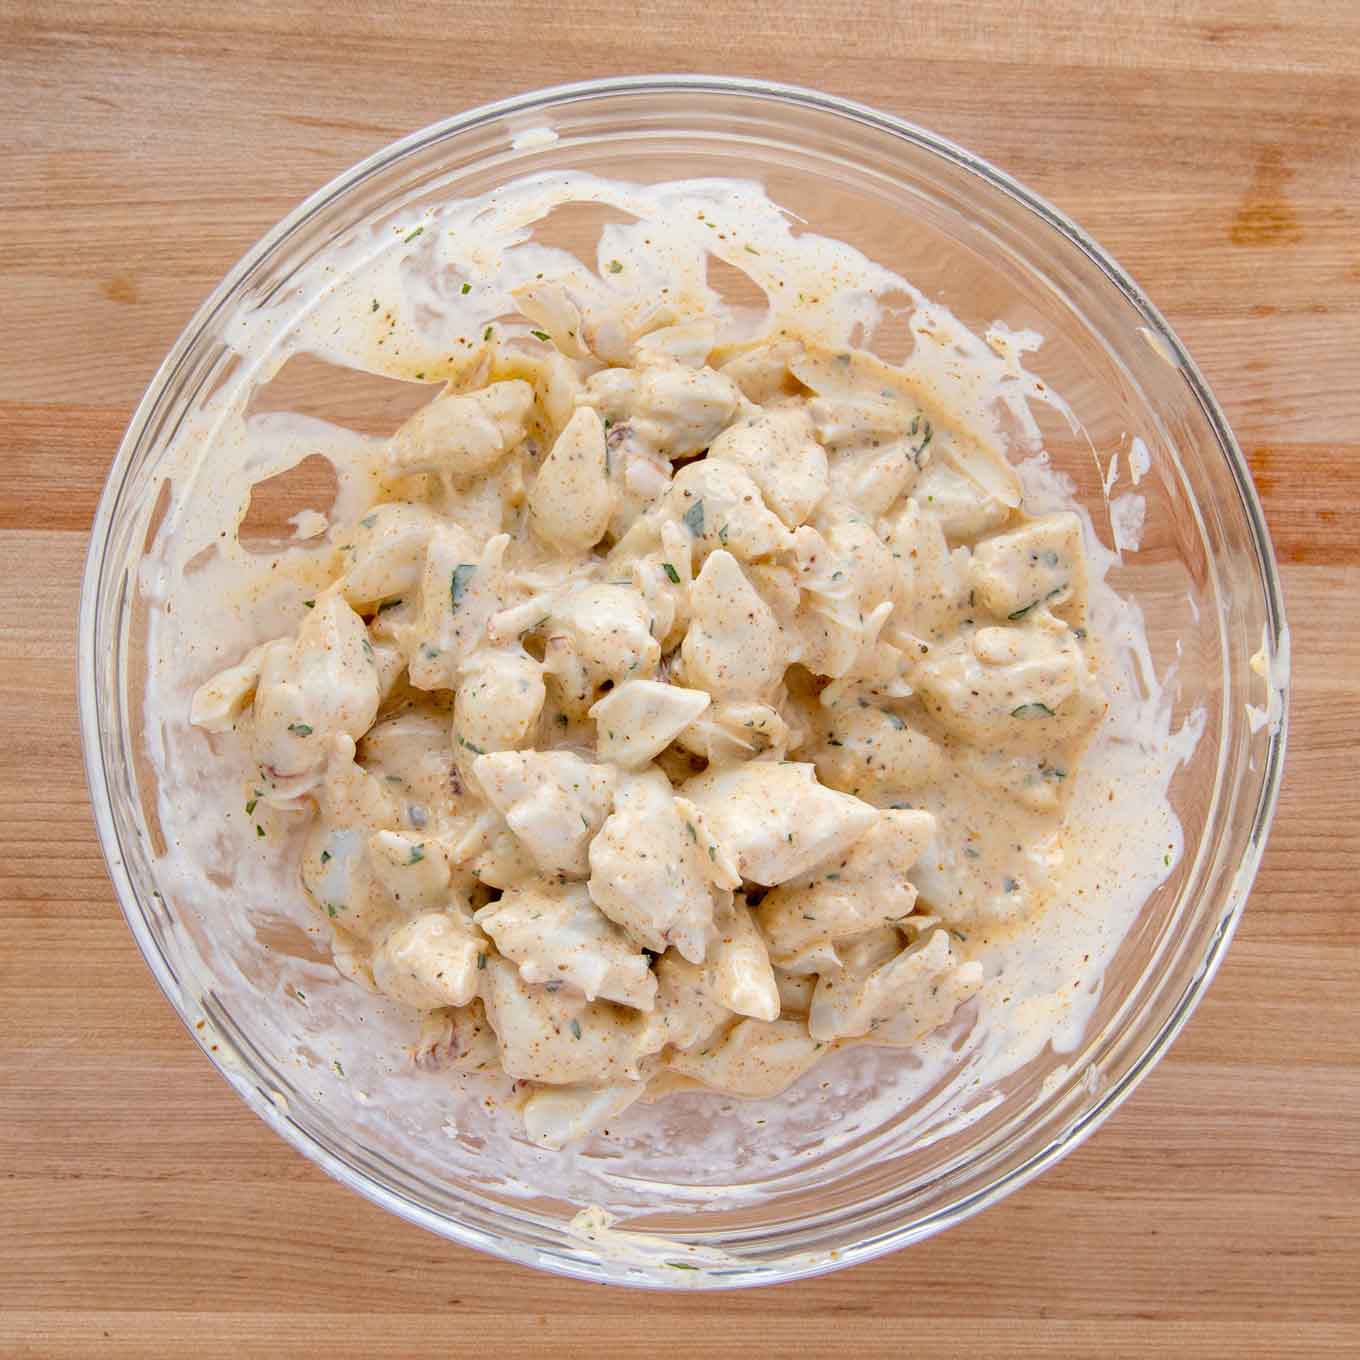 jumbo lump crabmeat mixed with imperial sauce in a glass bowl